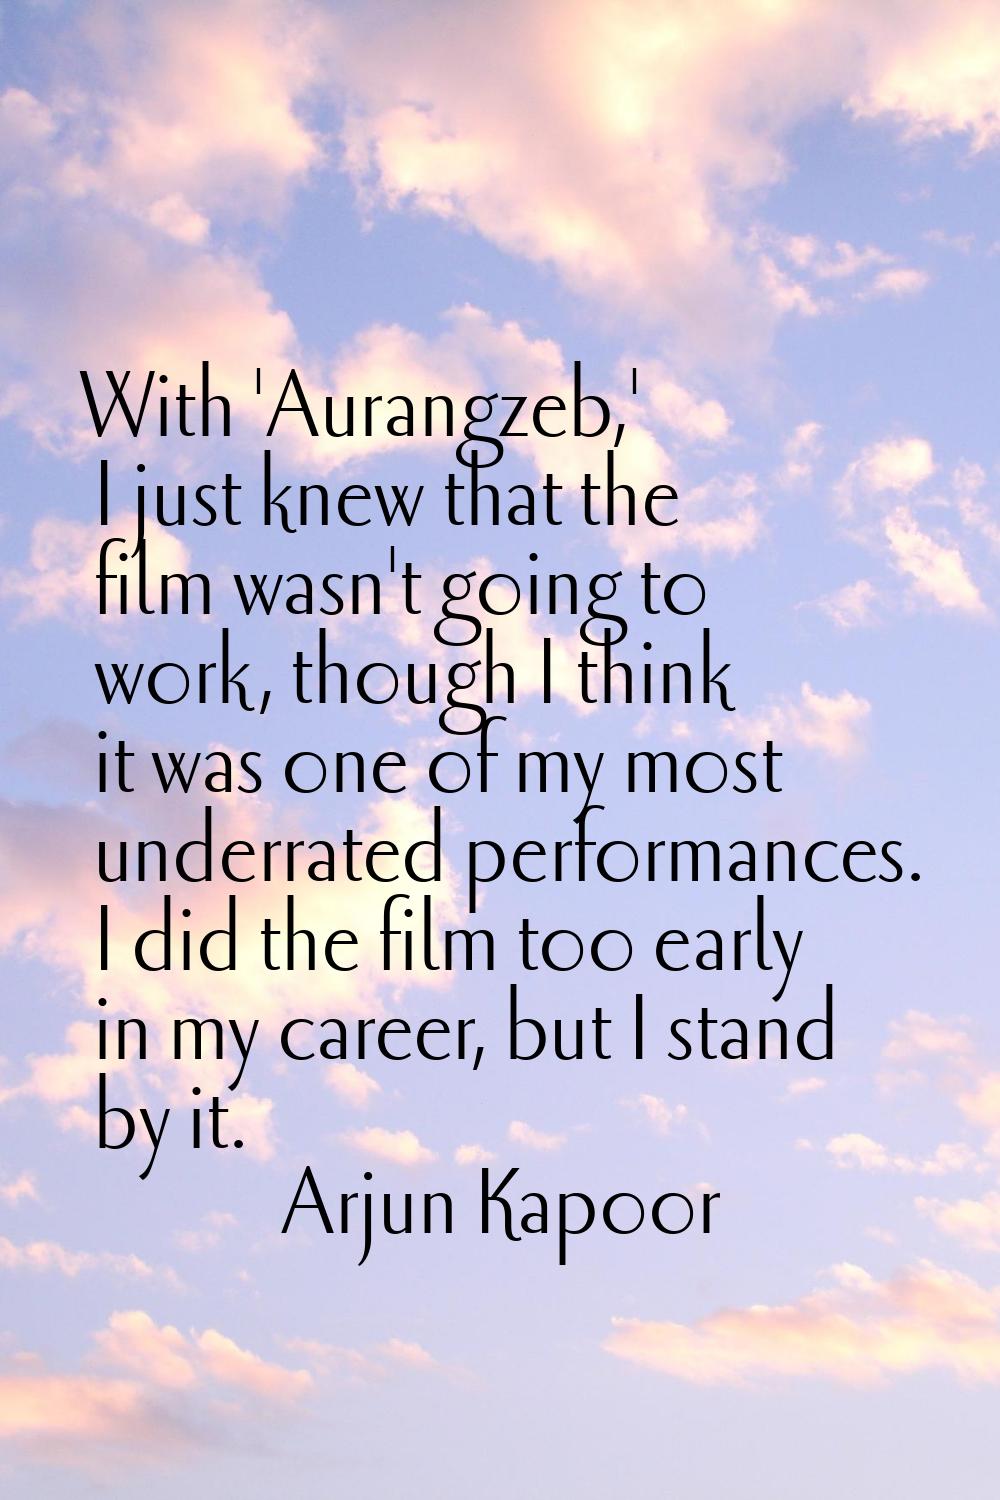 With 'Aurangzeb,' I just knew that the film wasn't going to work, though I think it was one of my m